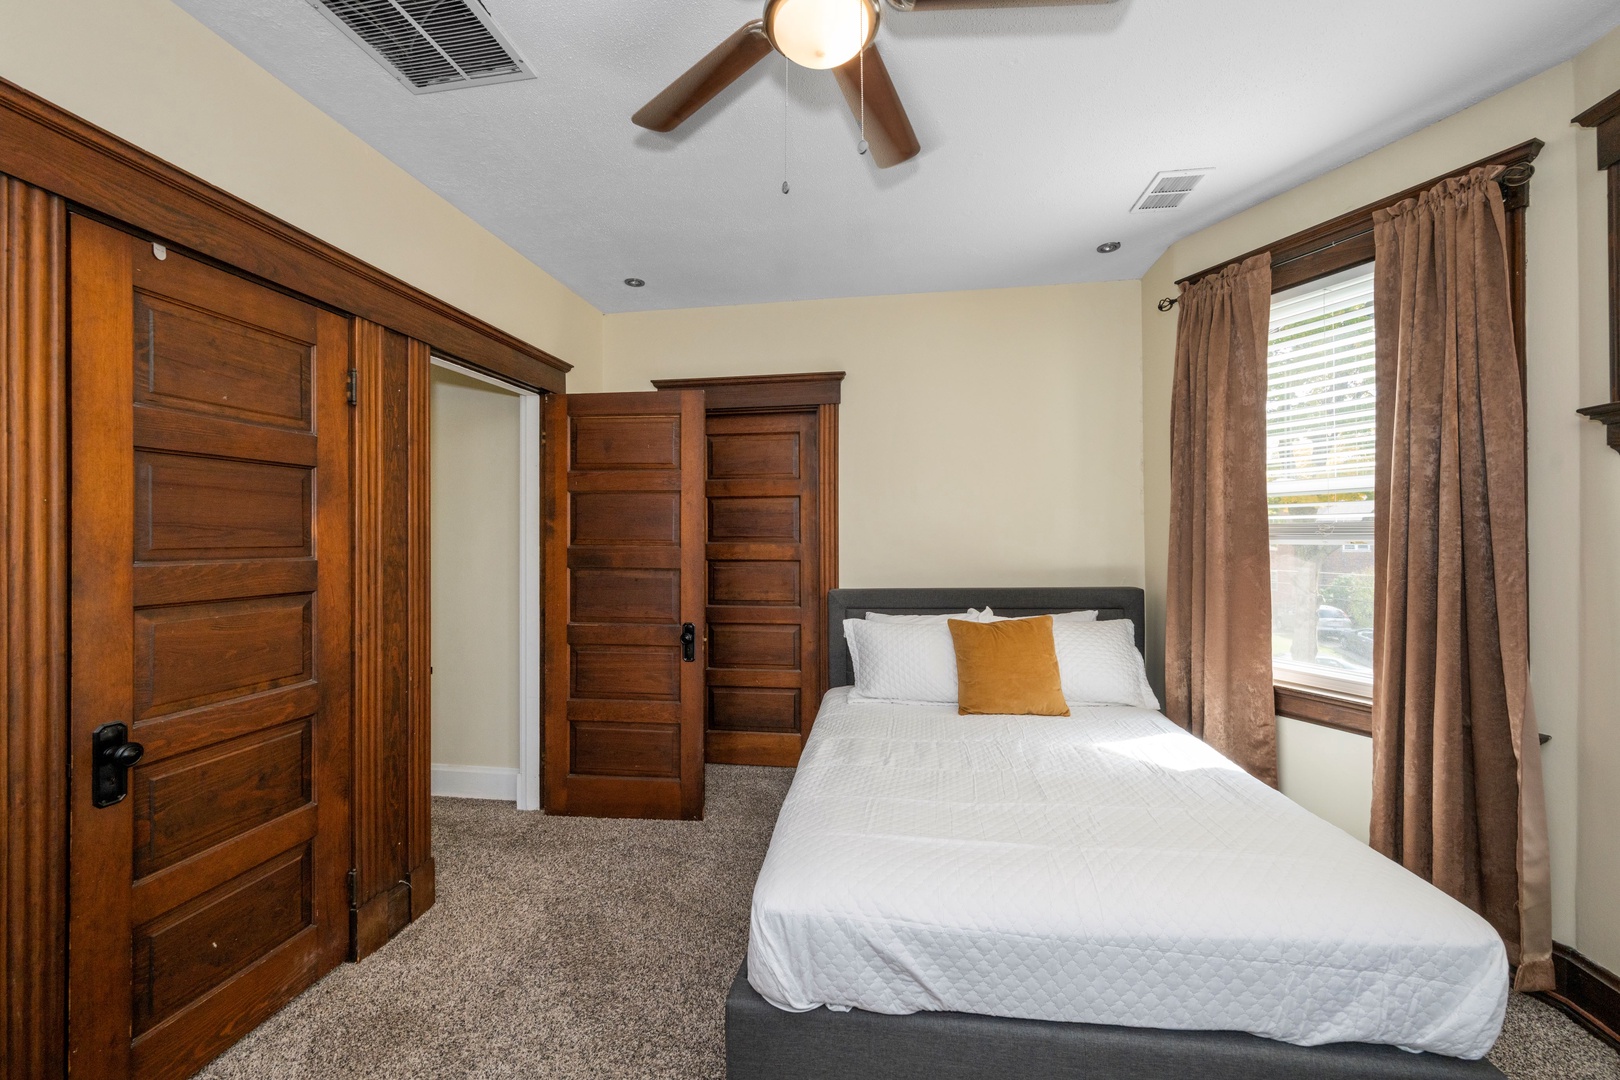 The 2nd of 2 queen bedrooms on the second level, with a dresser & ceiling fan